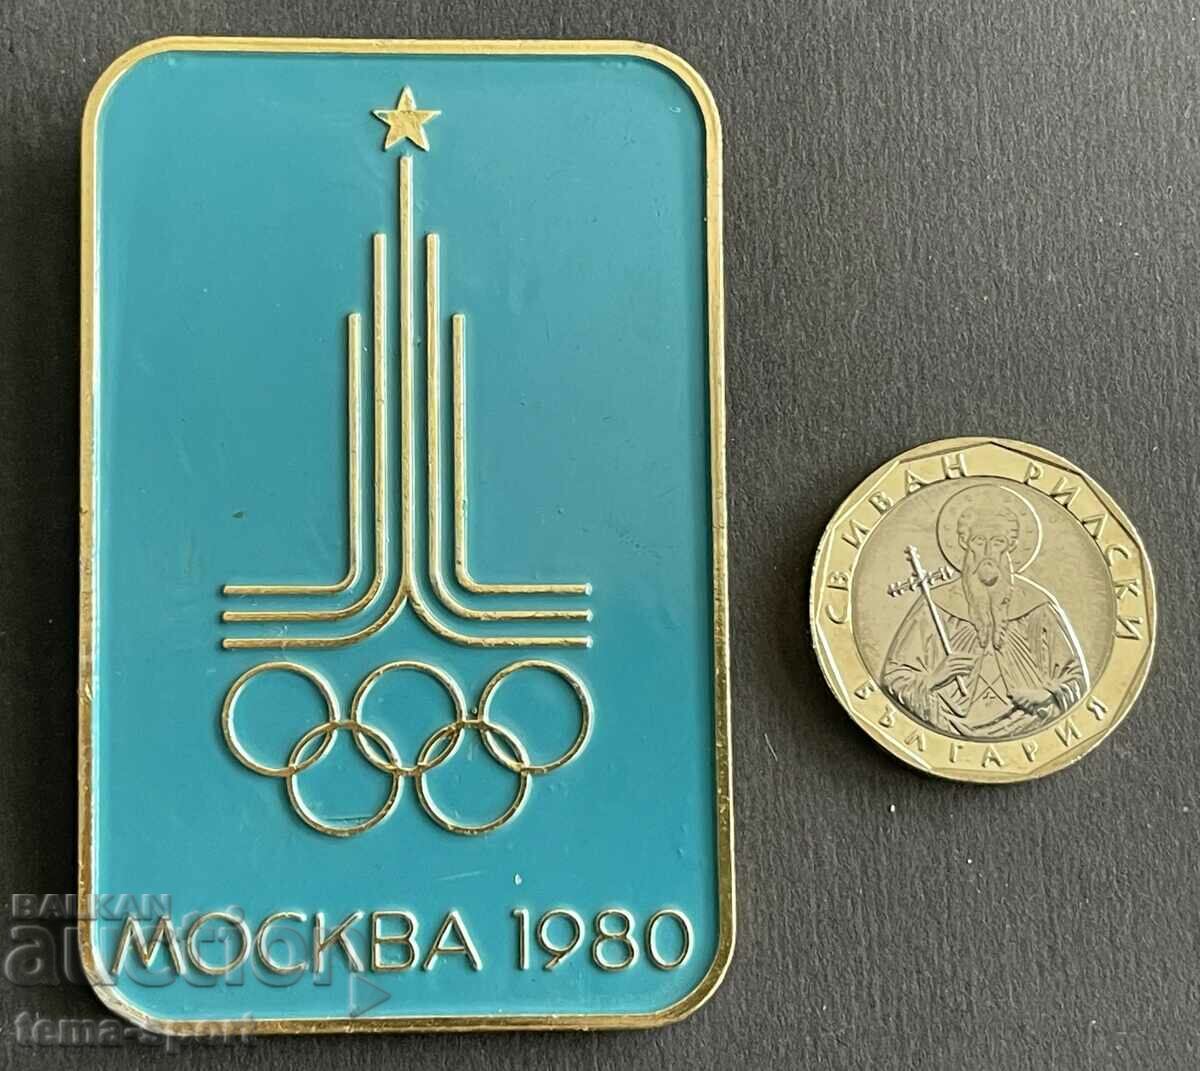 515 USSR big Olympic badge Olympics Moscow 1980.